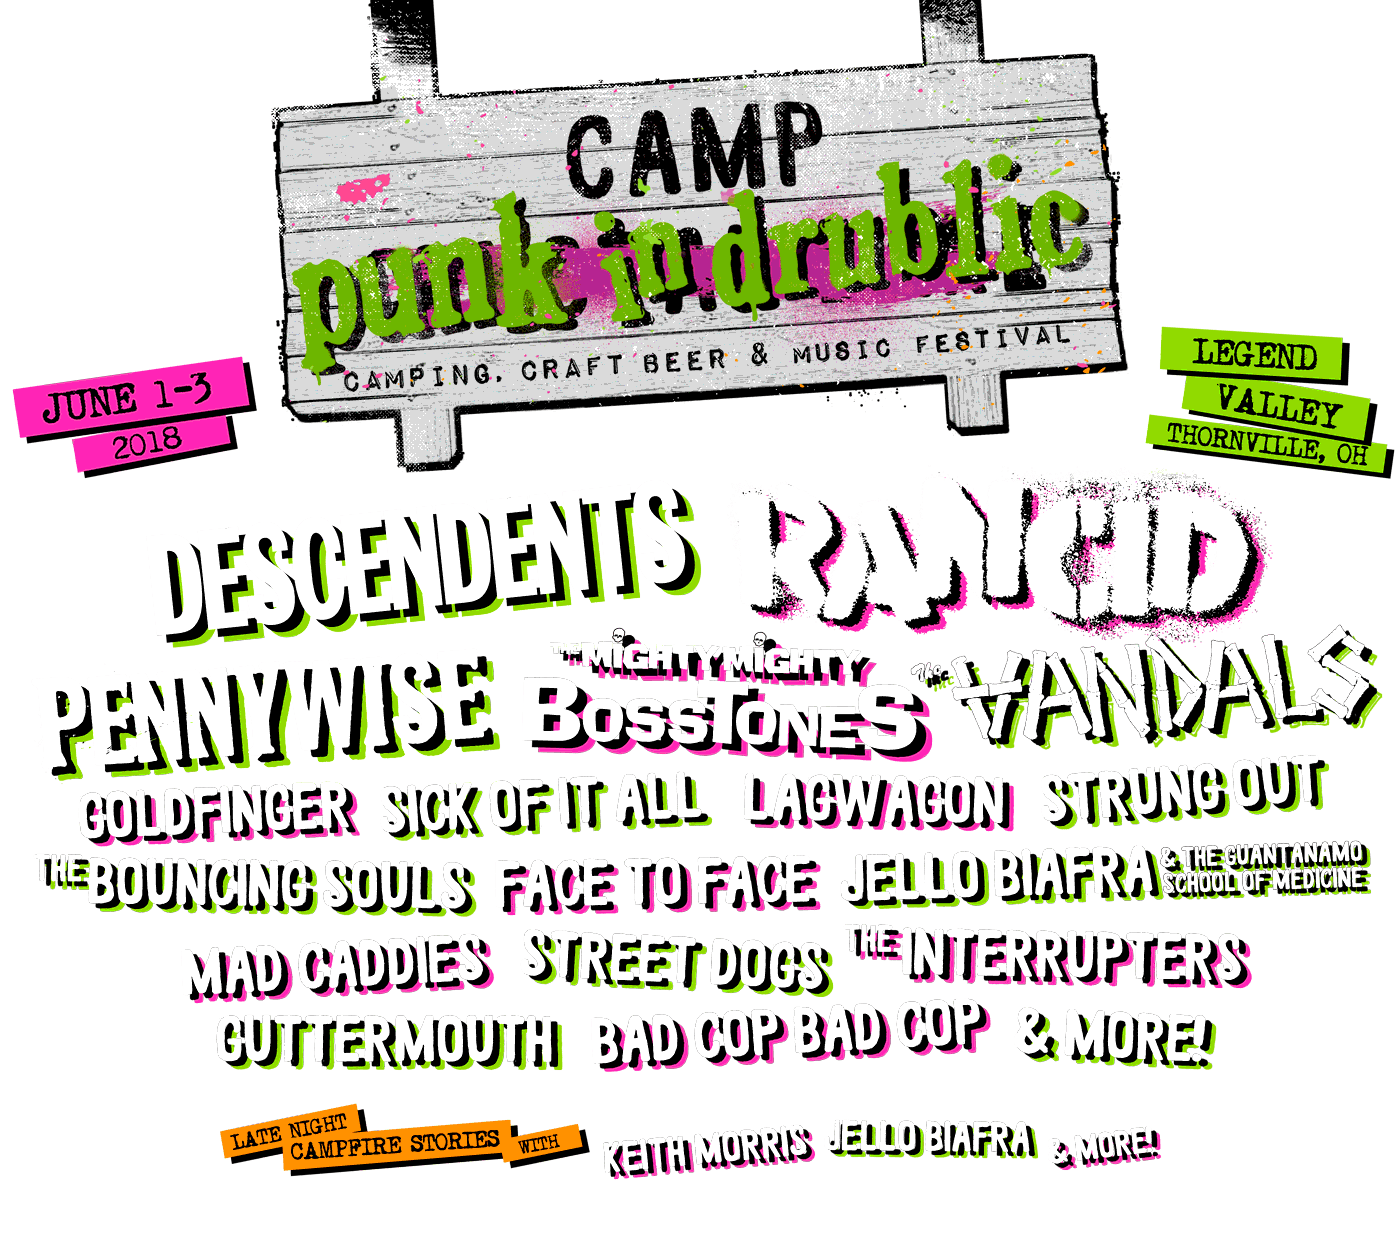 Camp Punk In Drublic Festival Replaces NOFX & Me First and the Gimme Gimmes With Descendents & The Vandals For June 1-3 Festival At Legend Valley Near Columbus, OH